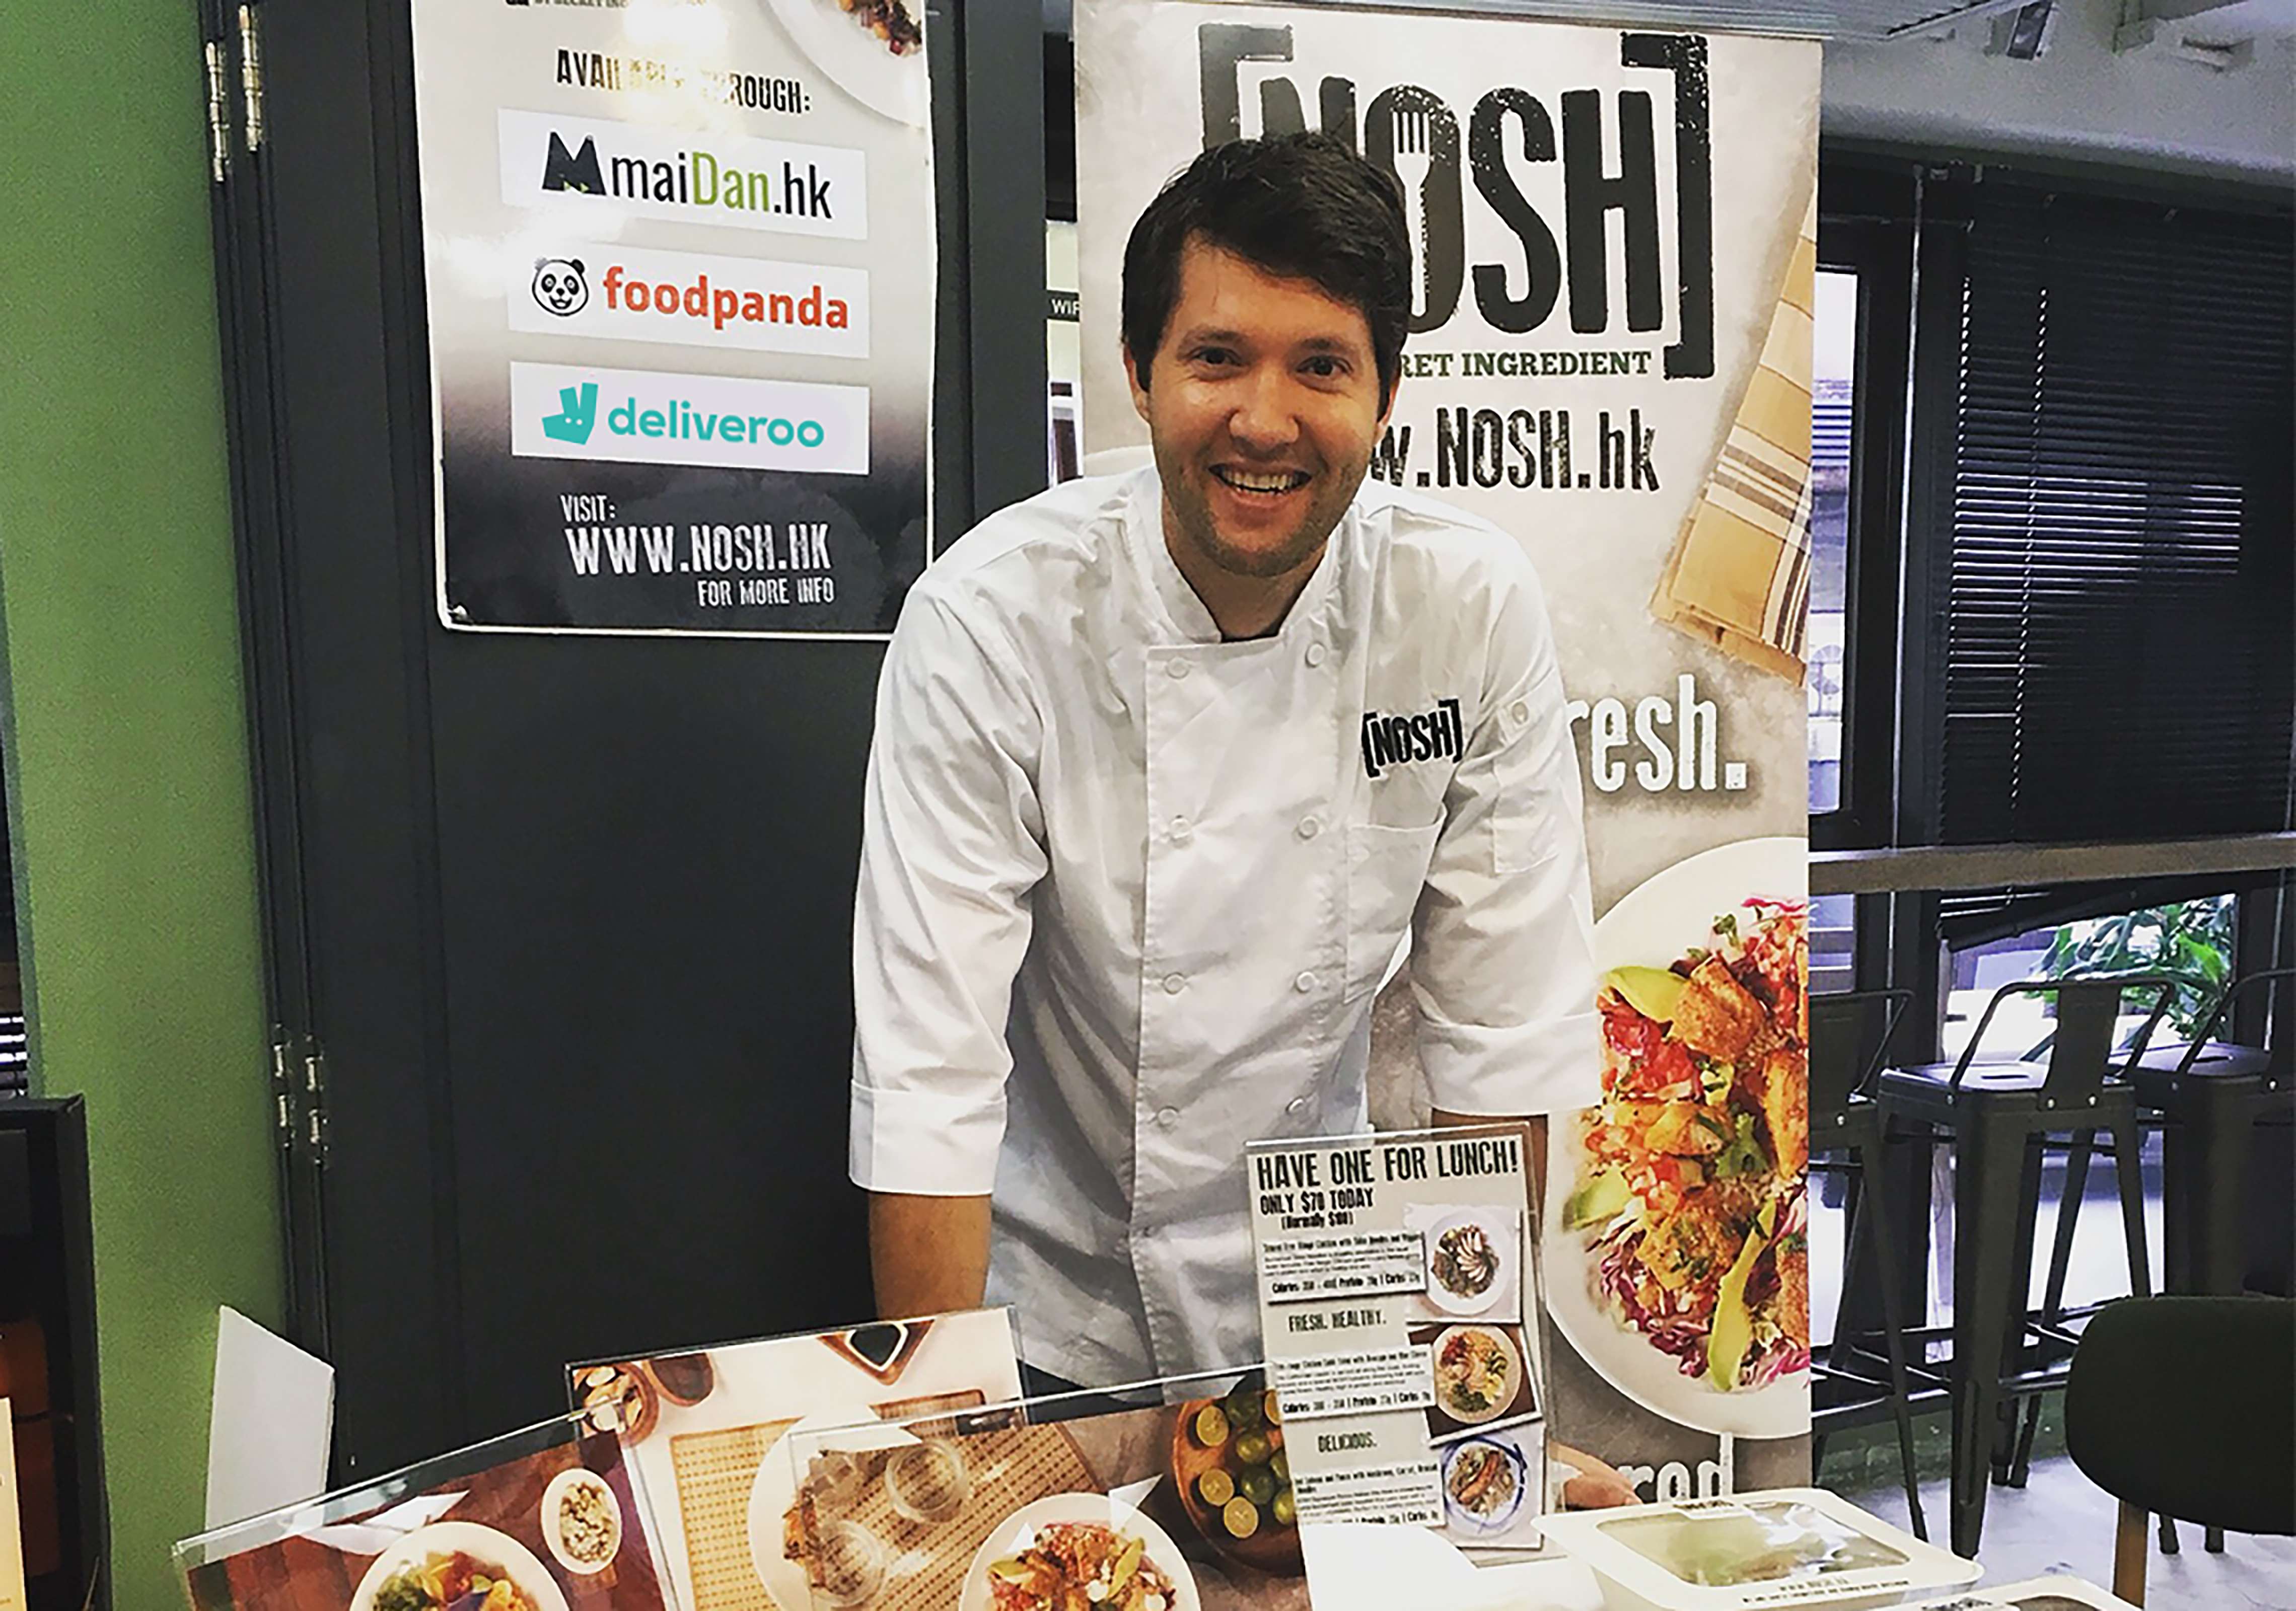 Maximilian Von Poelnitz says Nosh sells more than 2,000 meals a week and has seen month-on-month growth of 17 per cent. Photo: Nosh